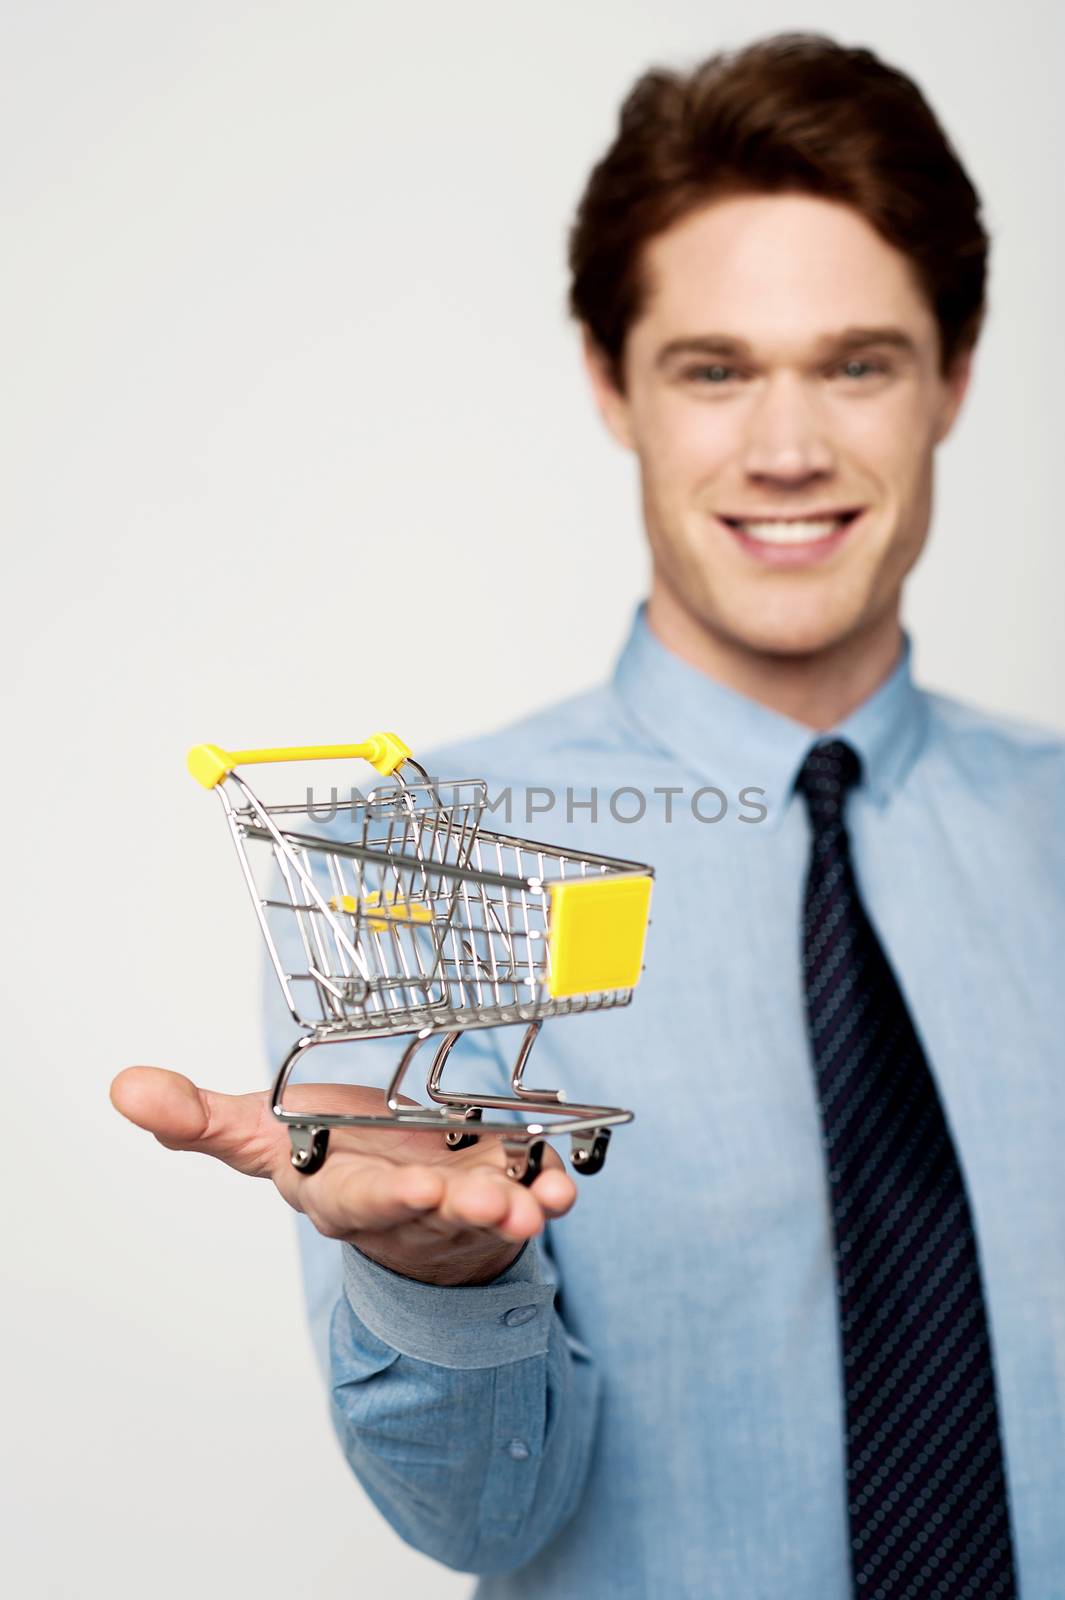 Add to cart, e-commerce concept by stockyimages